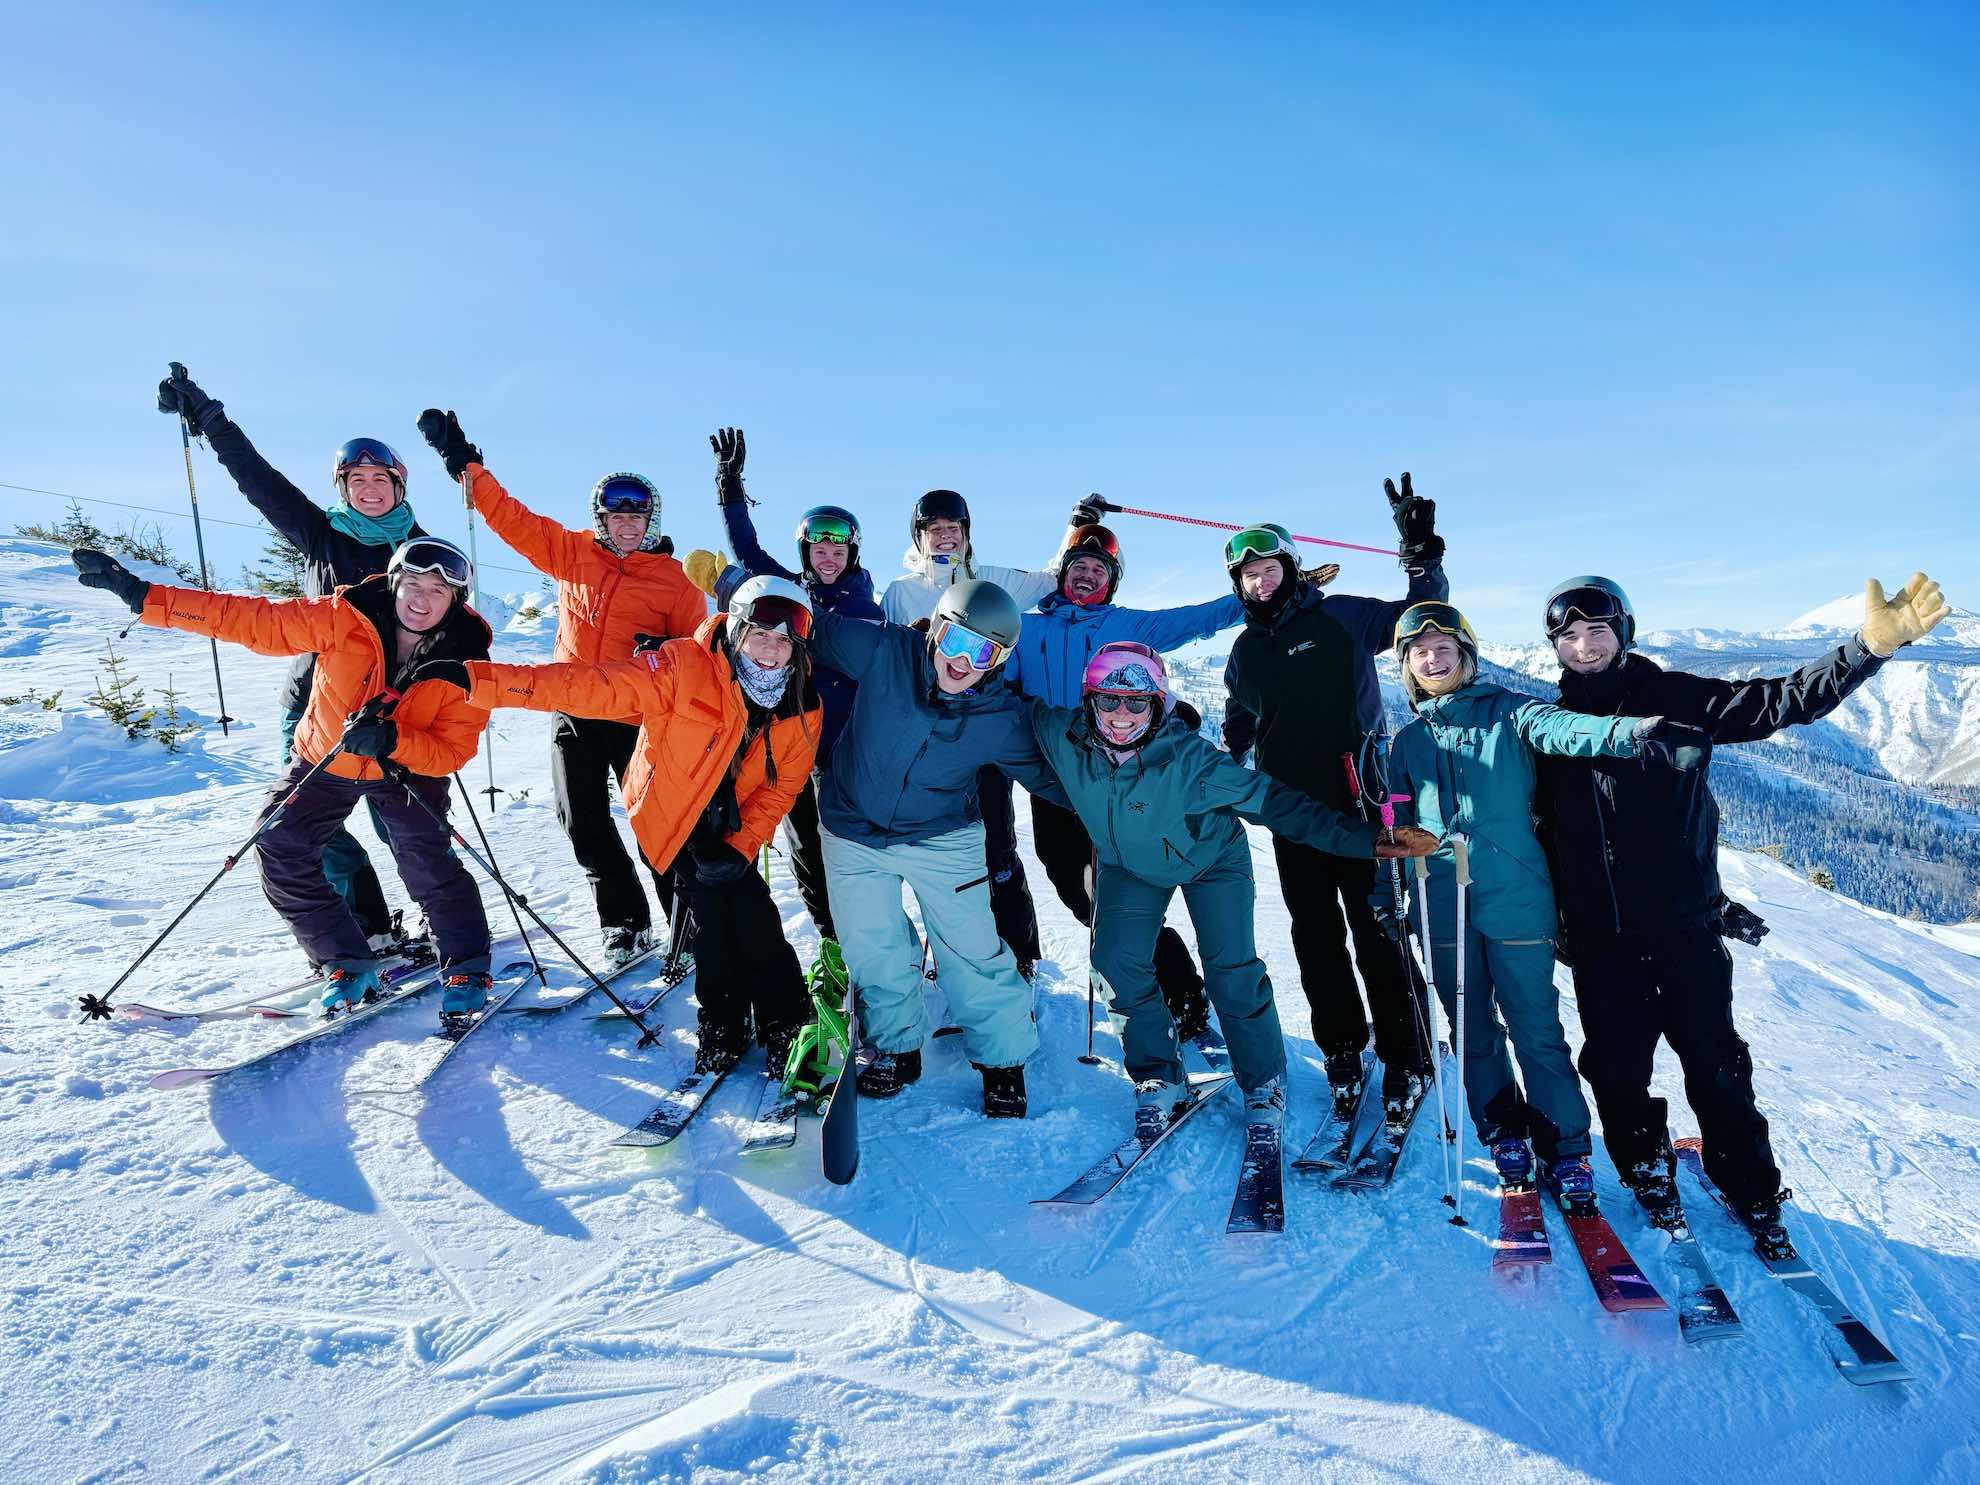 Challenge Aspen staff on a ski day with their hands up in the air.